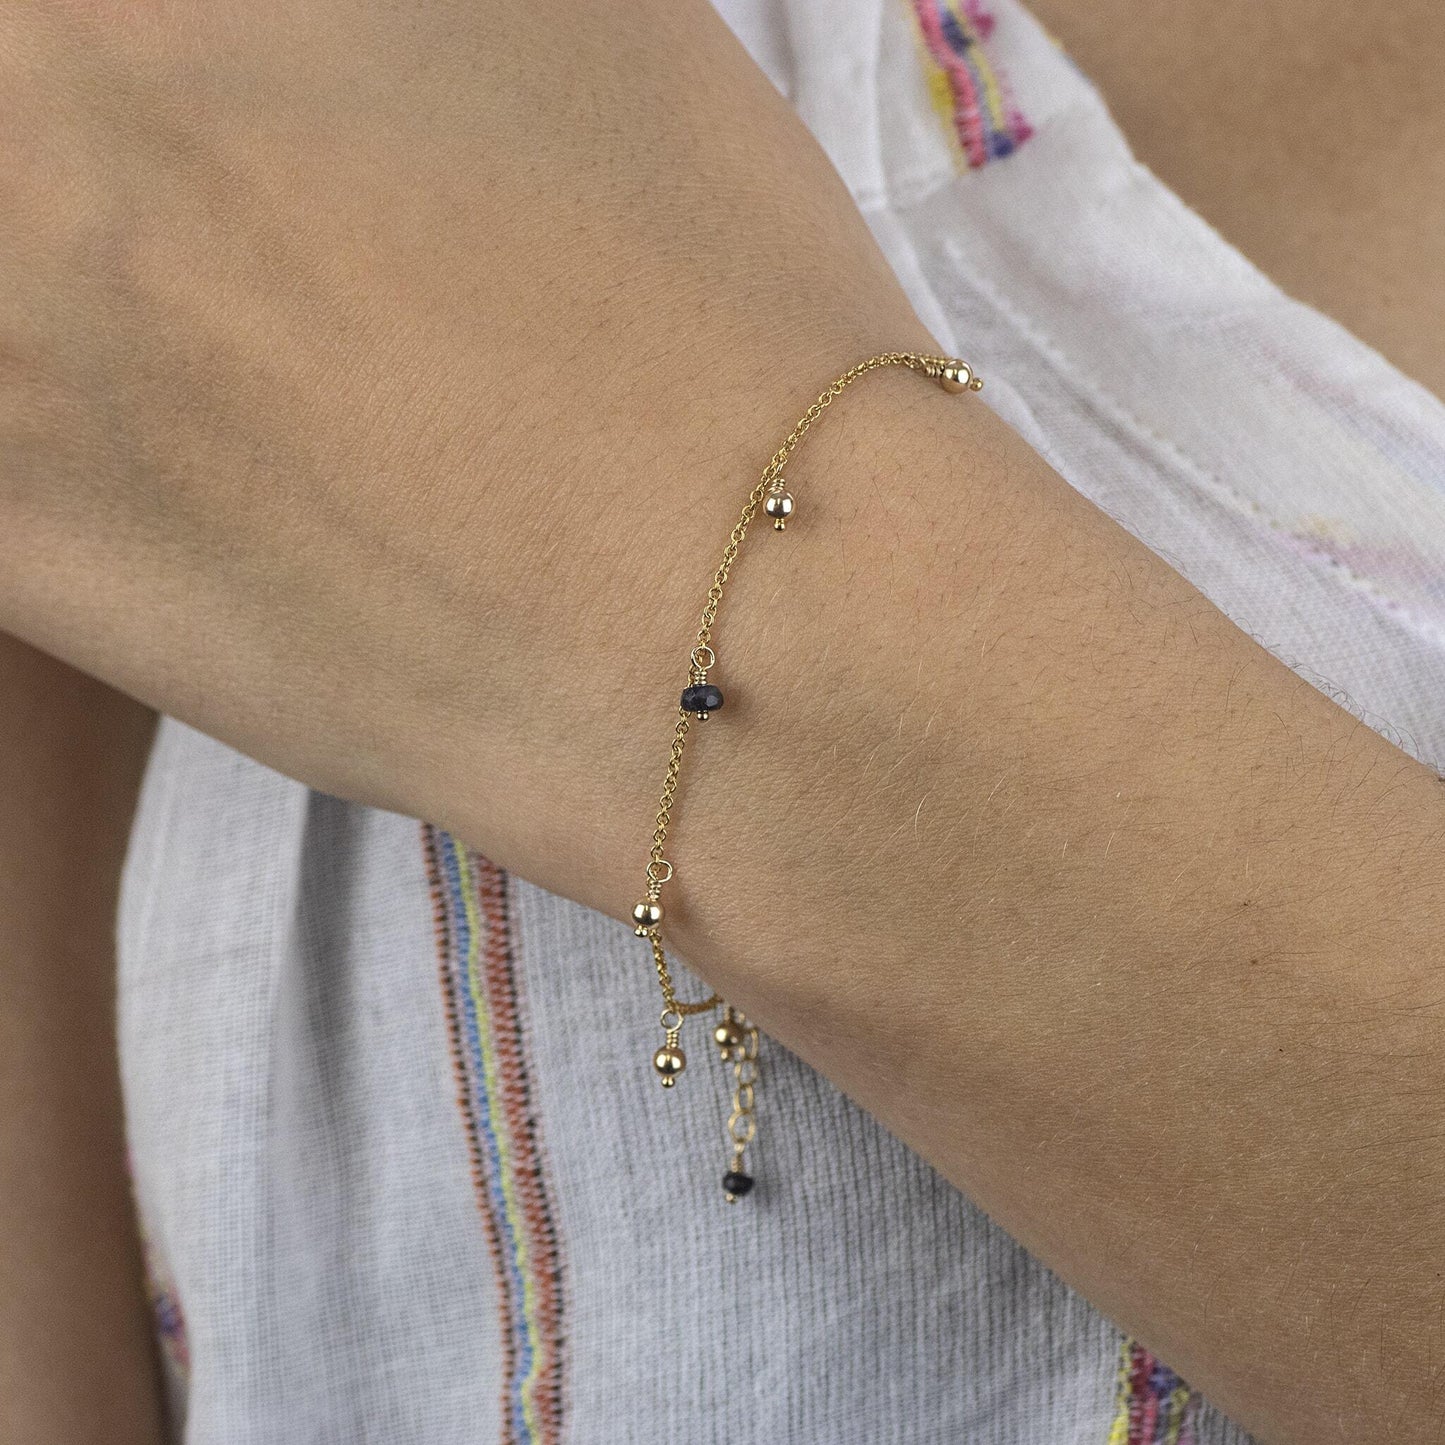 13th Birthday Gift - Delicate Double Birthstone Bracelet - Silver & Gold